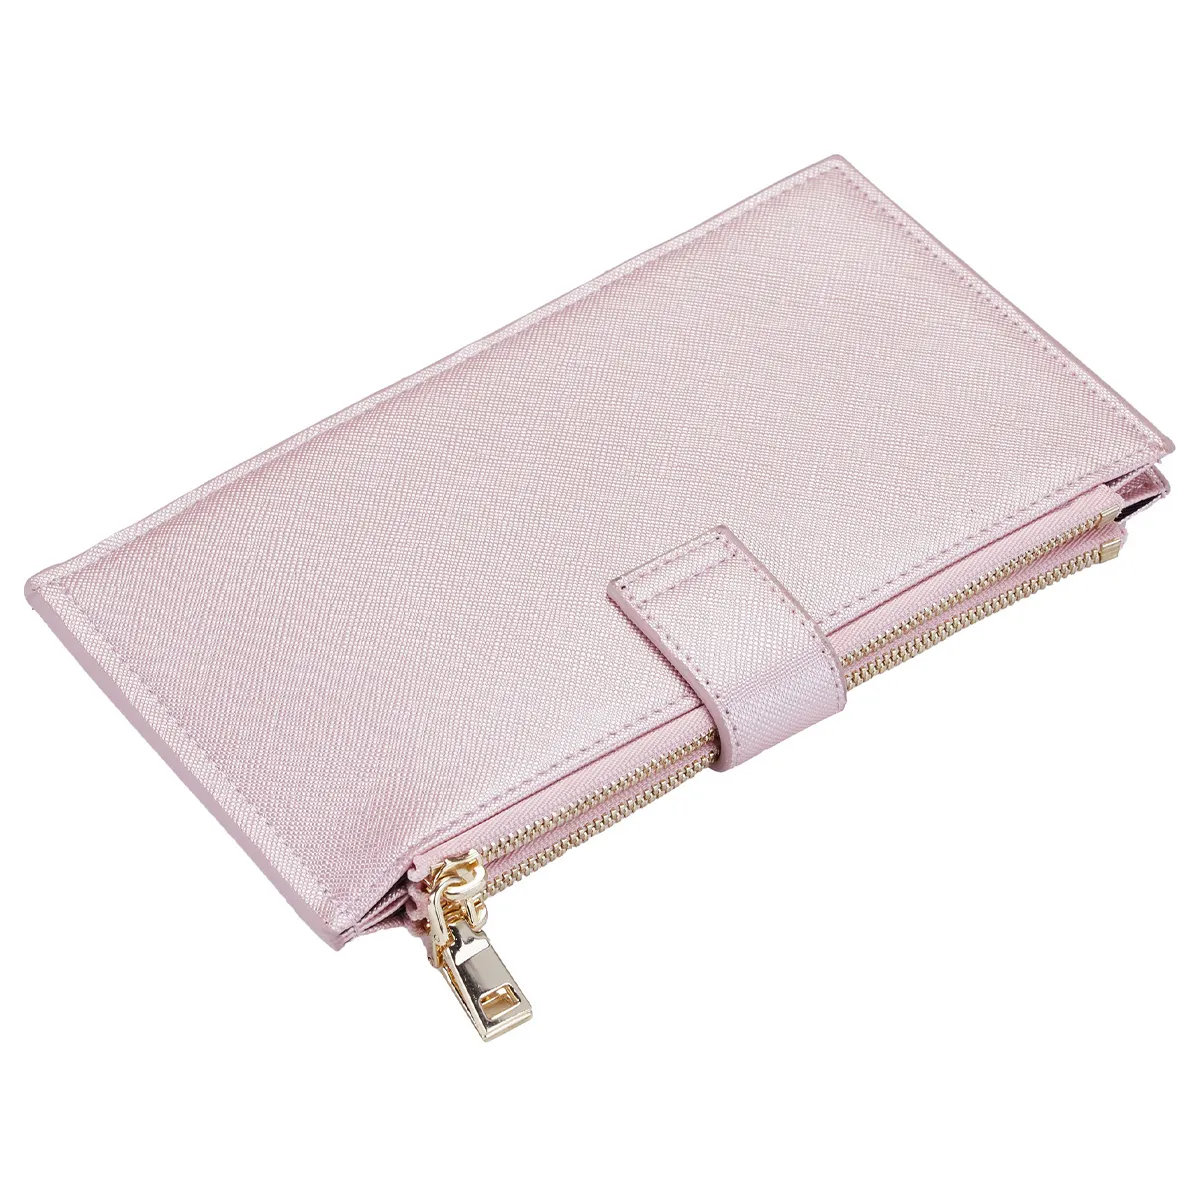 New Design Ladies Credit Card Wallet Rfid Blocking Multi Card Holder Double Zipper Many Departments Women Wallet